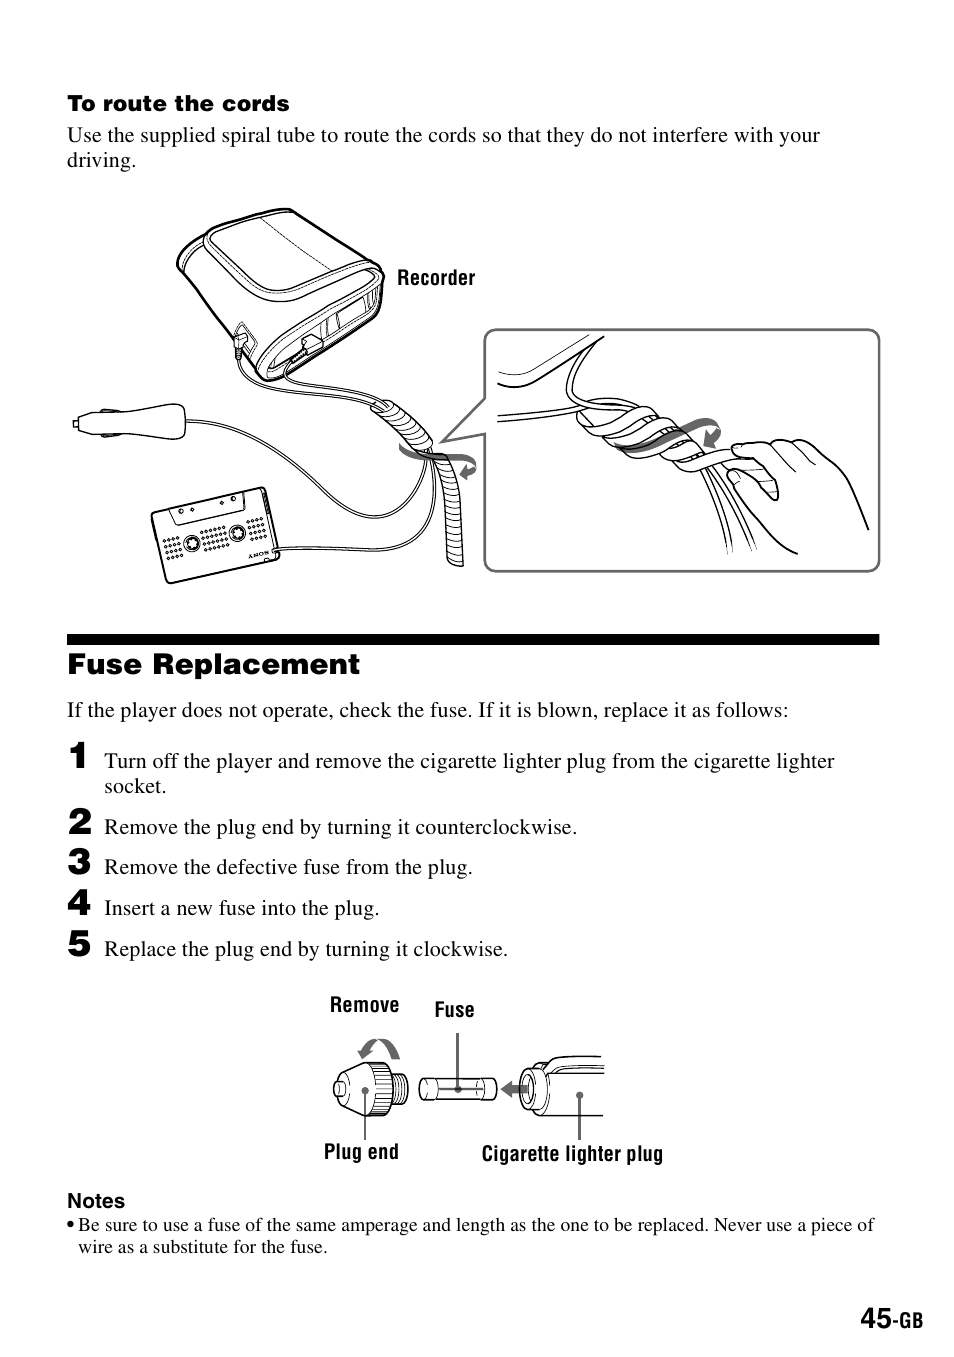 Fuse replacement | Sony MZ-N707 Manuel d'utilisation | Page 45 / 160